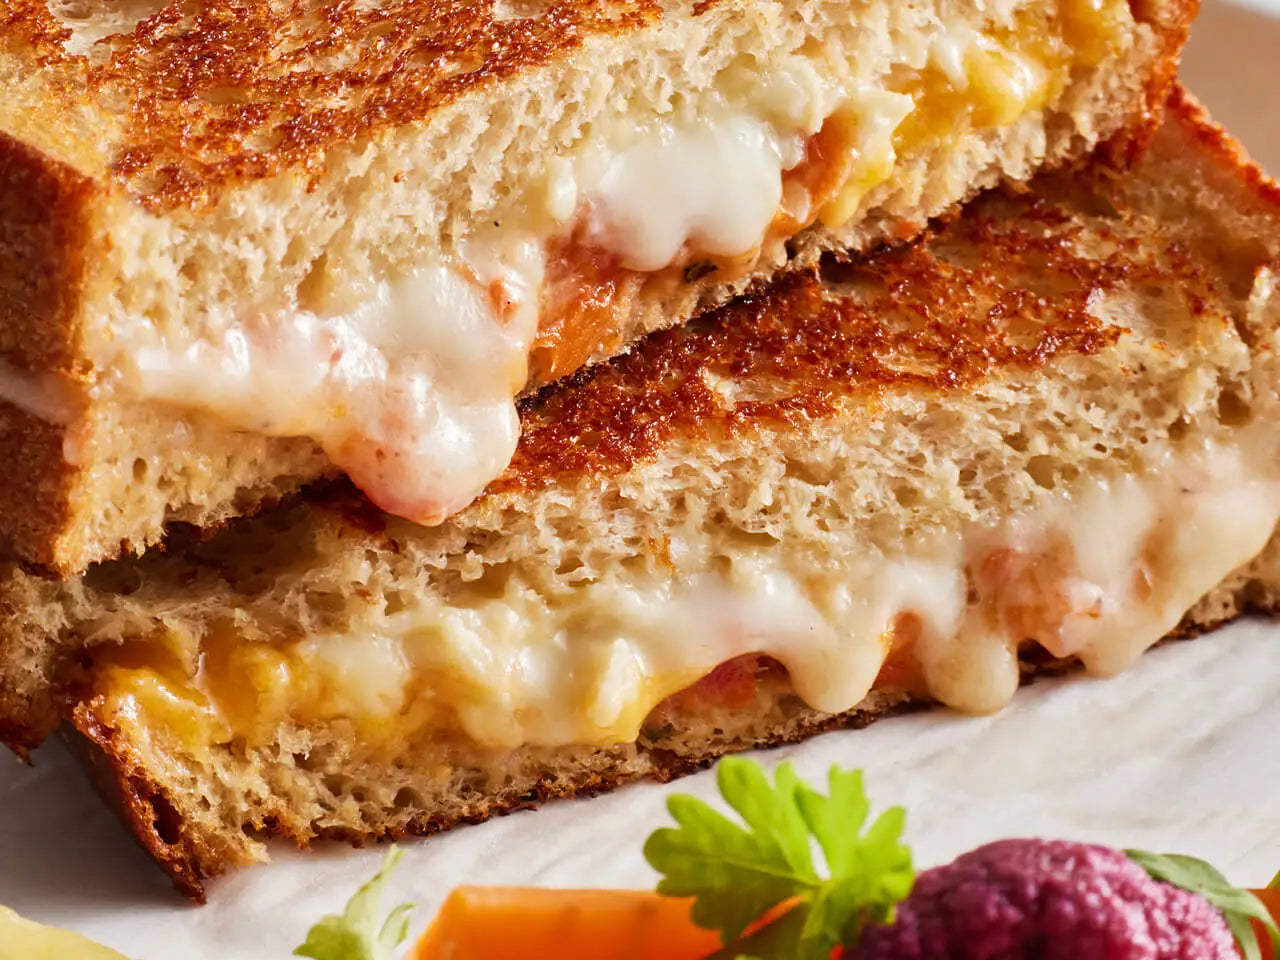 Glorious Grilled Cheese